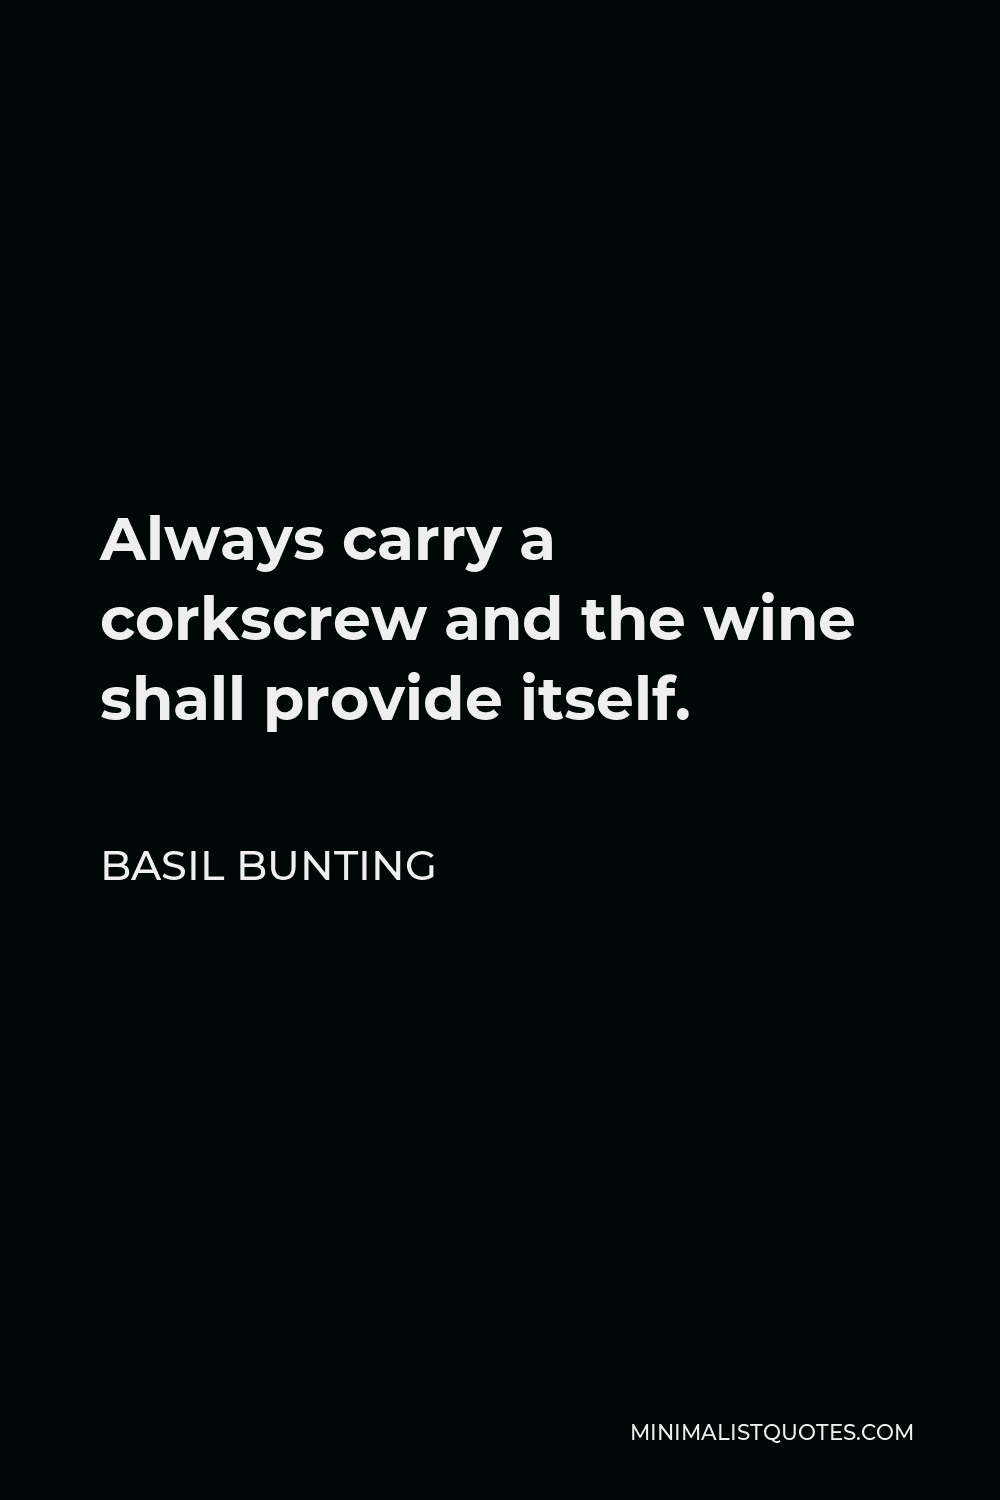 Basil Bunting Quote - Always carry a corkscrew and the wine shall provide itself.